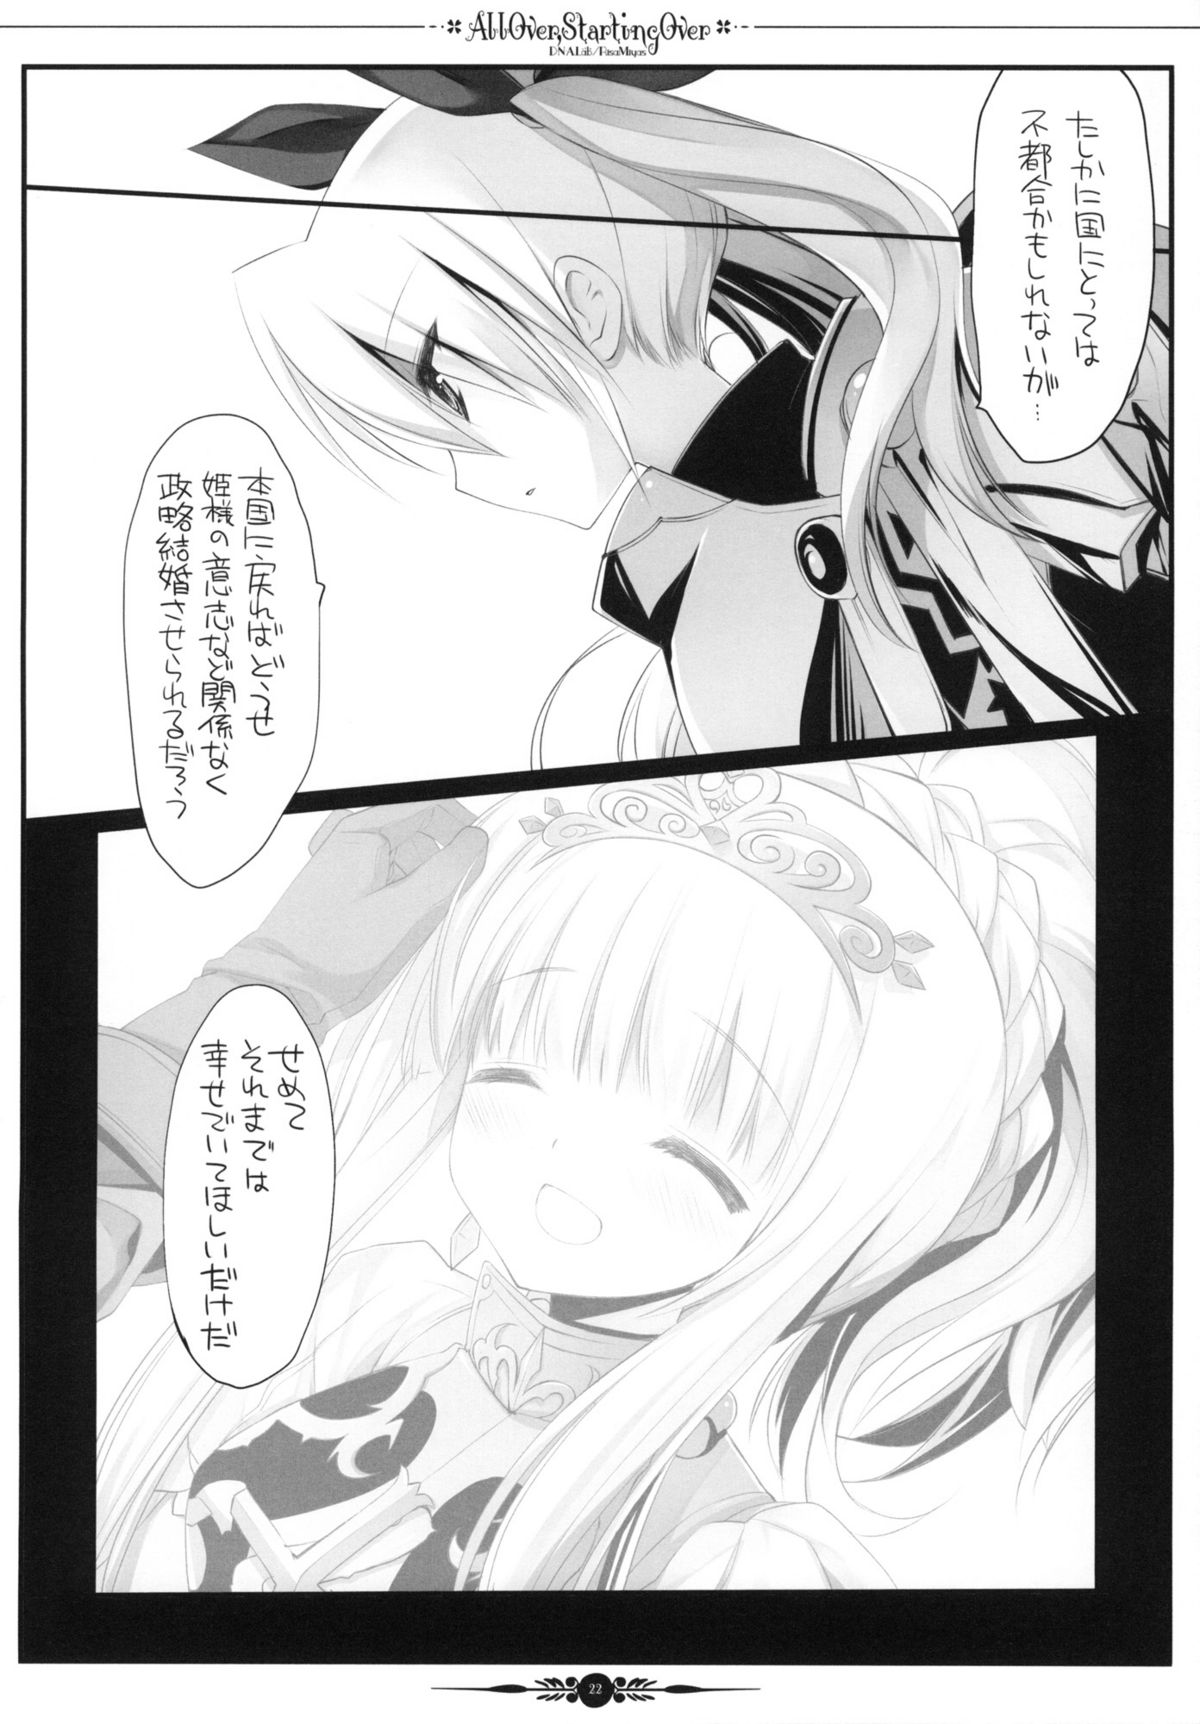 (COMIC1☆4) [D･N･A.Lab. (ミヤスリサ)] All Over, Starting Over (世界樹の迷宮 3)